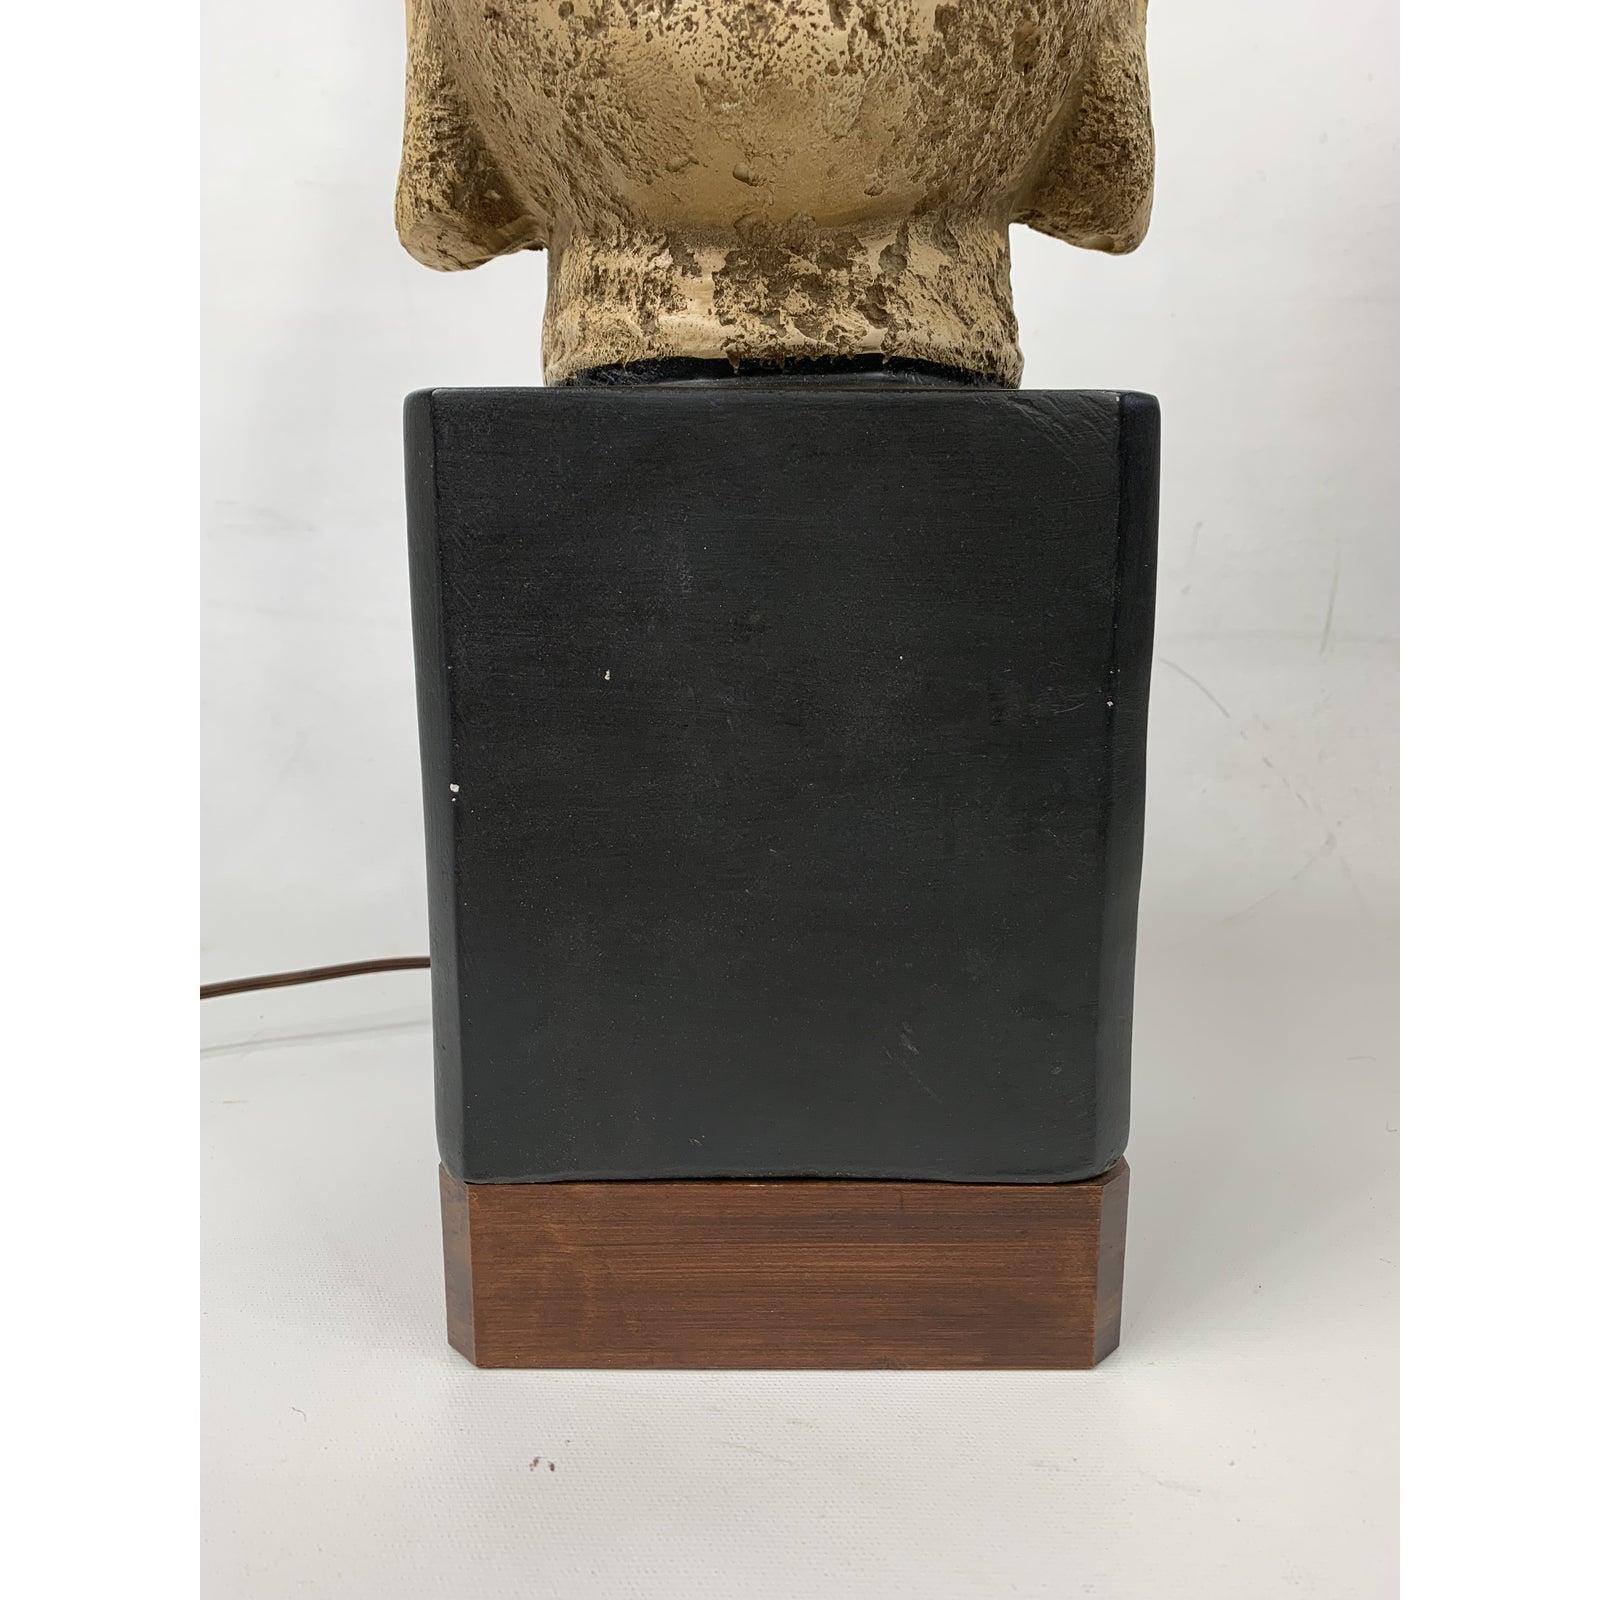 Very unique 1960s modern Buddha pottery bust table lamp, this is a very nice large lamp and the base is made out of teak.